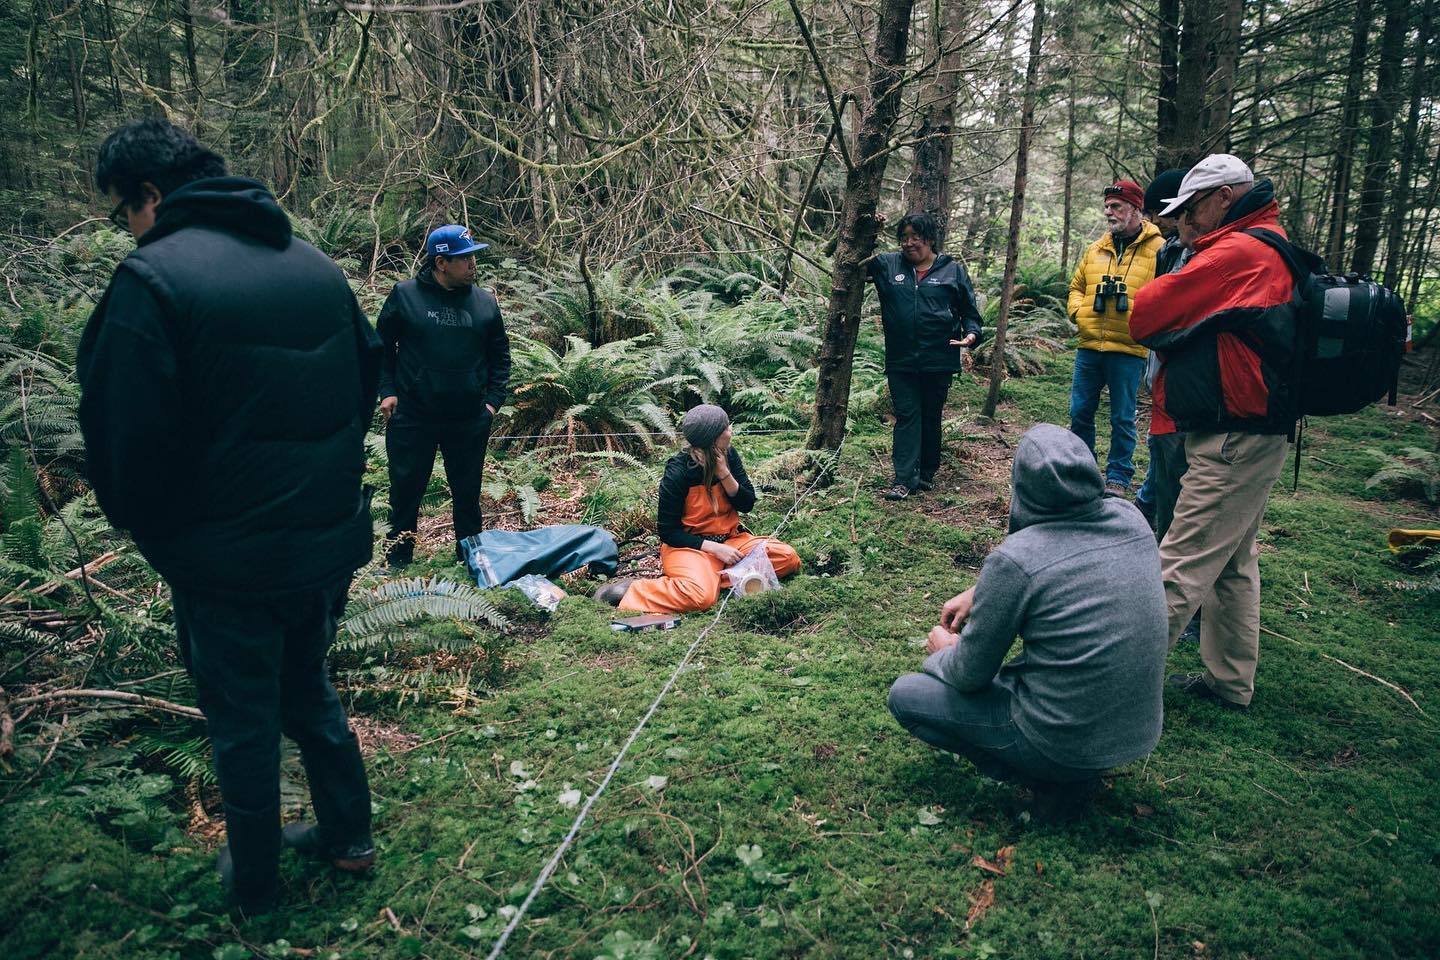 About half a dozen scientists stand or sit around a wire strung across the forest to collect bear hair and samples in the Great Bear Rainforest.